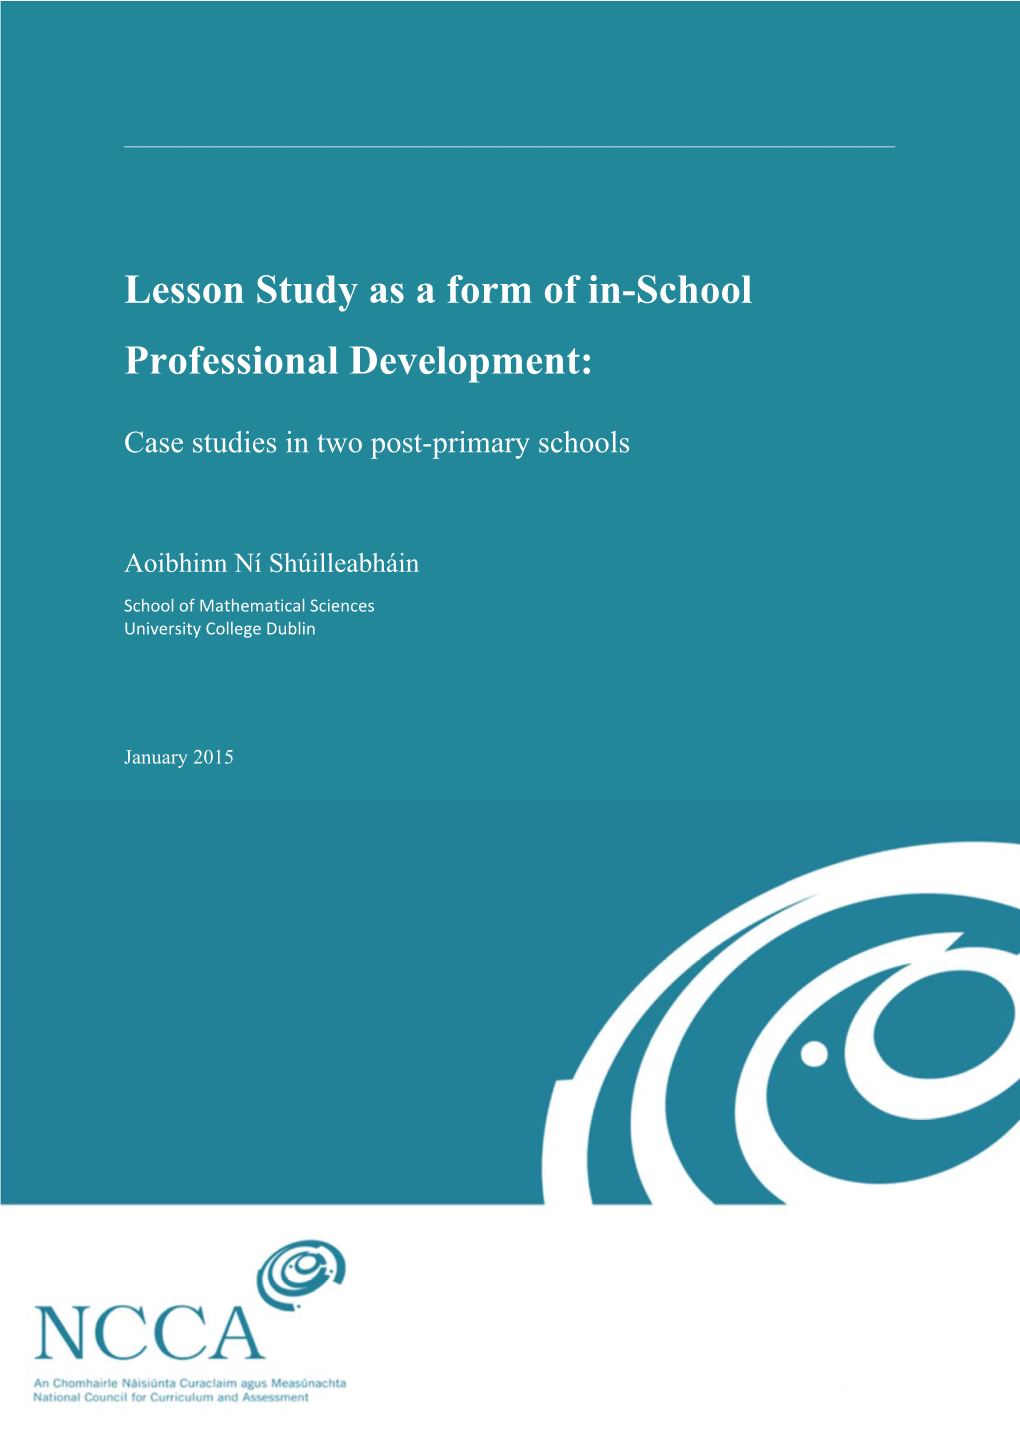 Lesson Study As a Form of In-School Professional Development